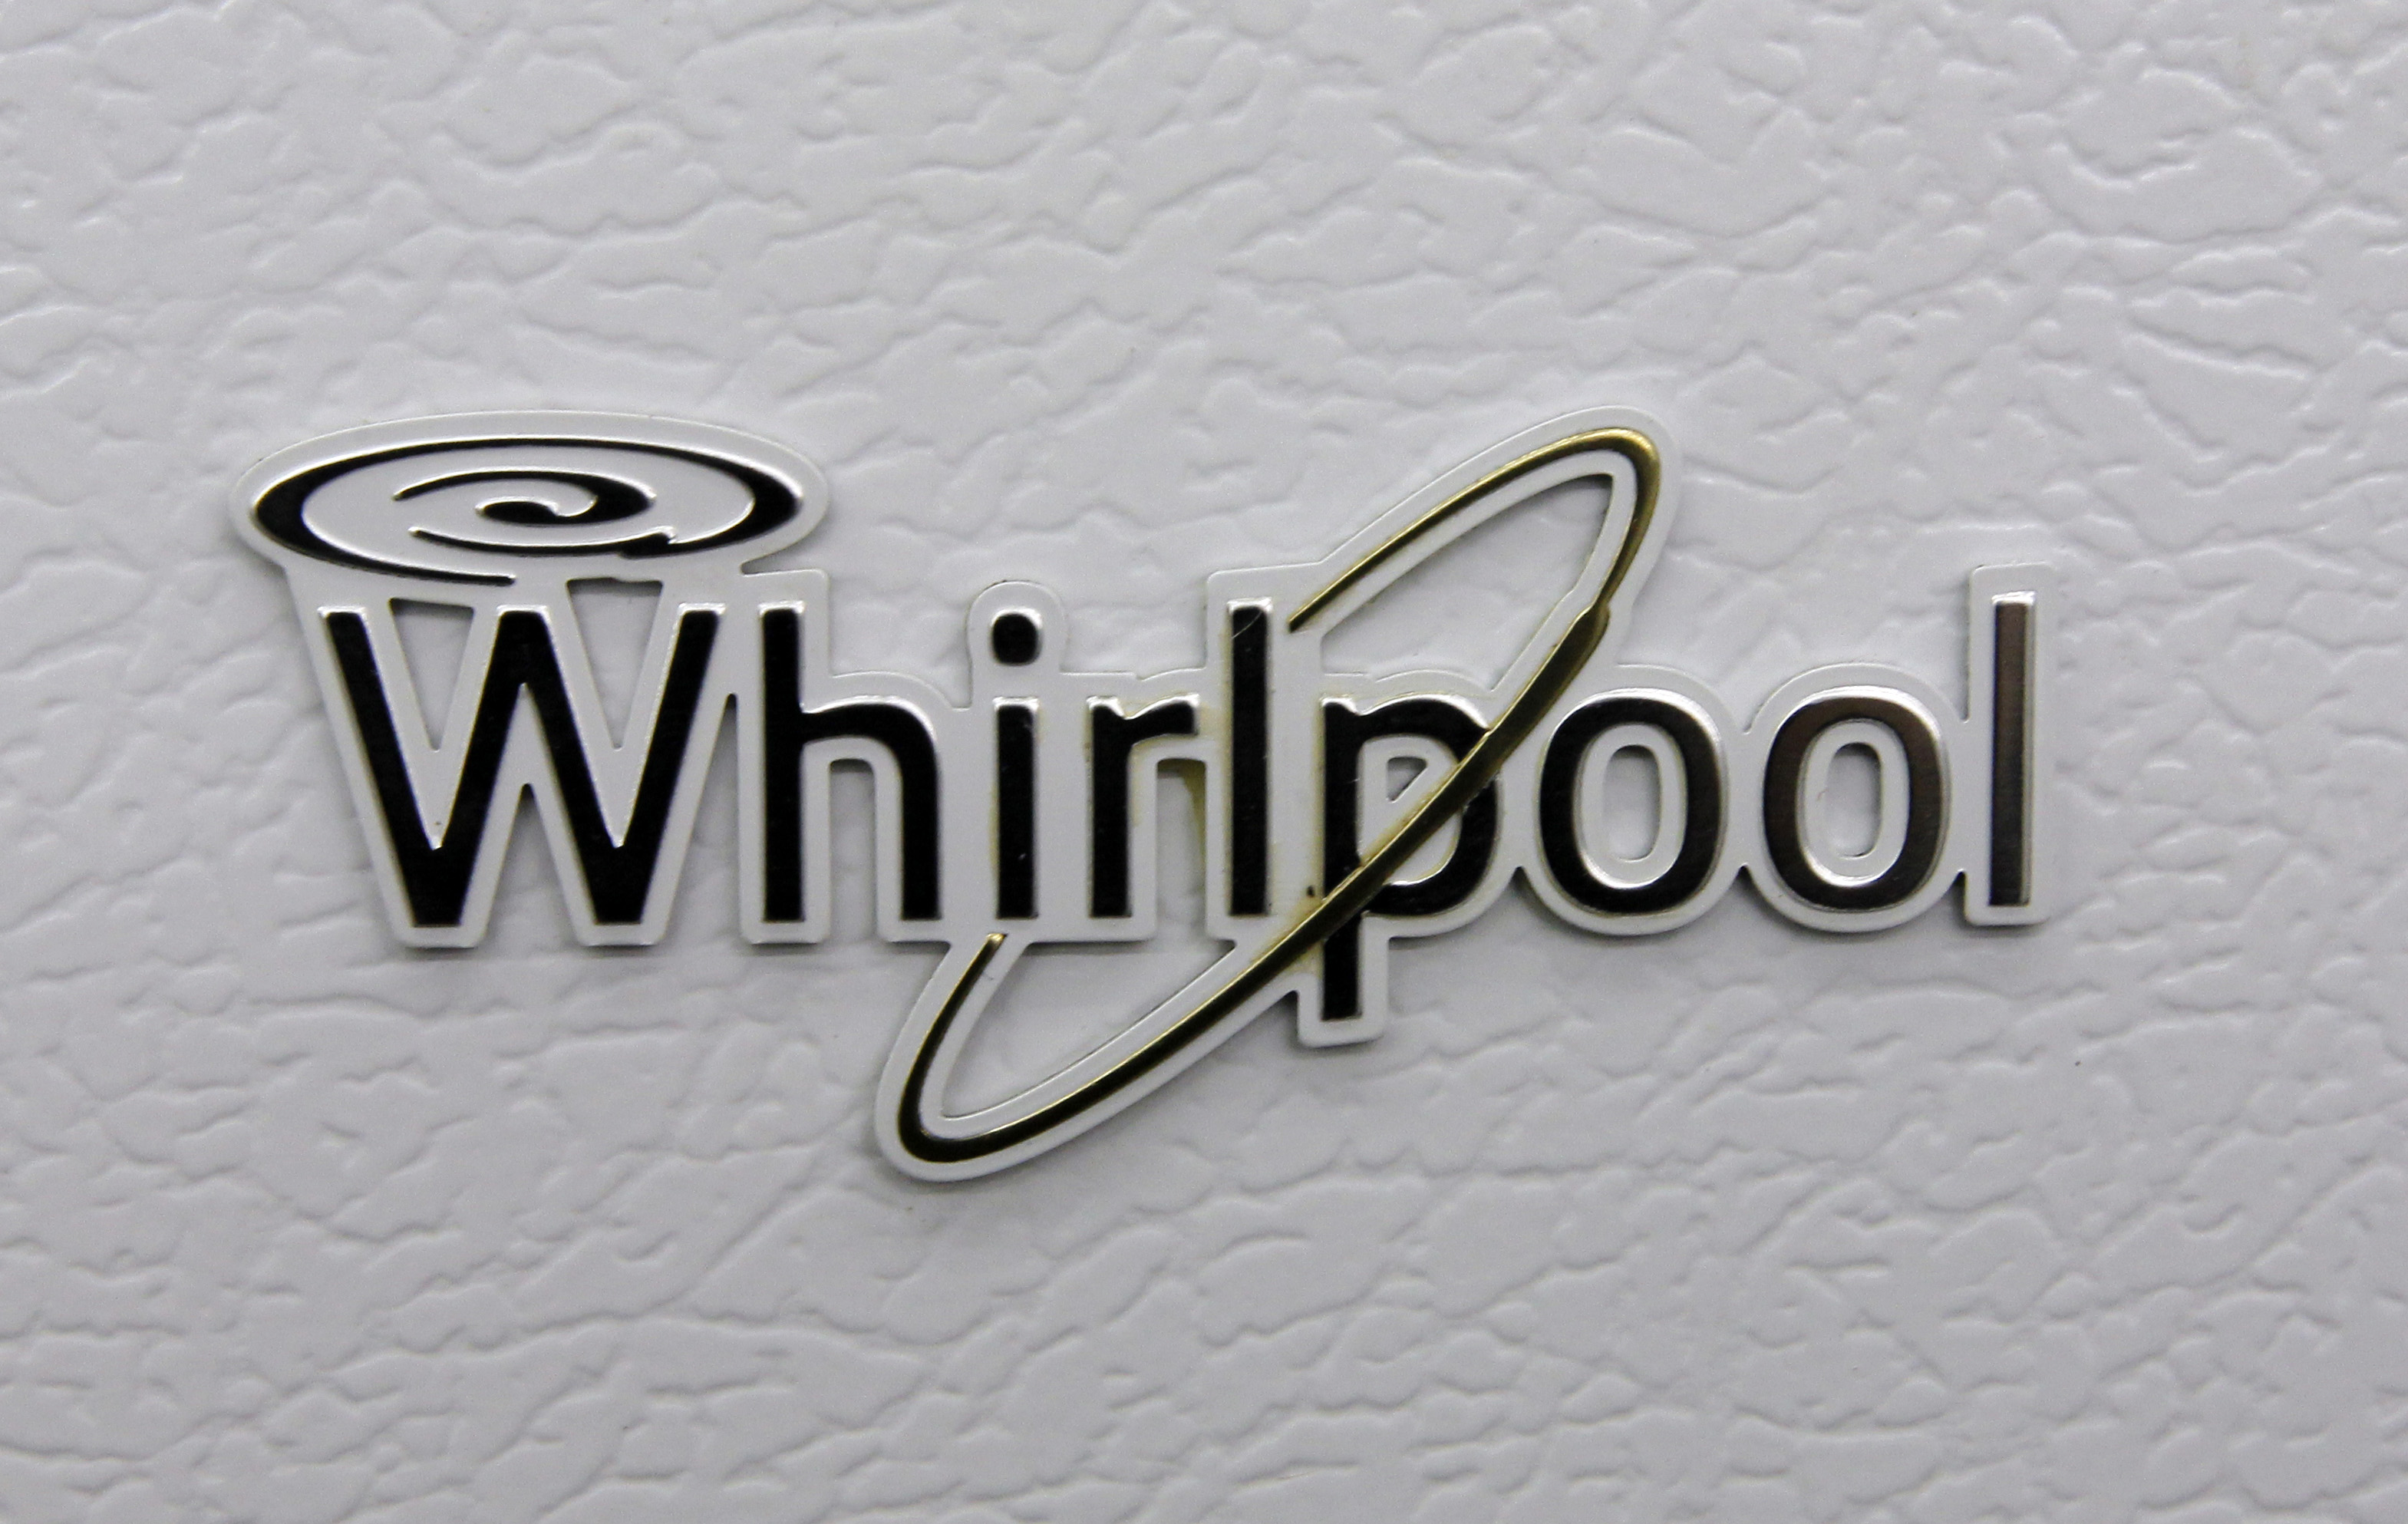 Is Whirlpool Stock Still Attractive After A Solid 3x Rally?